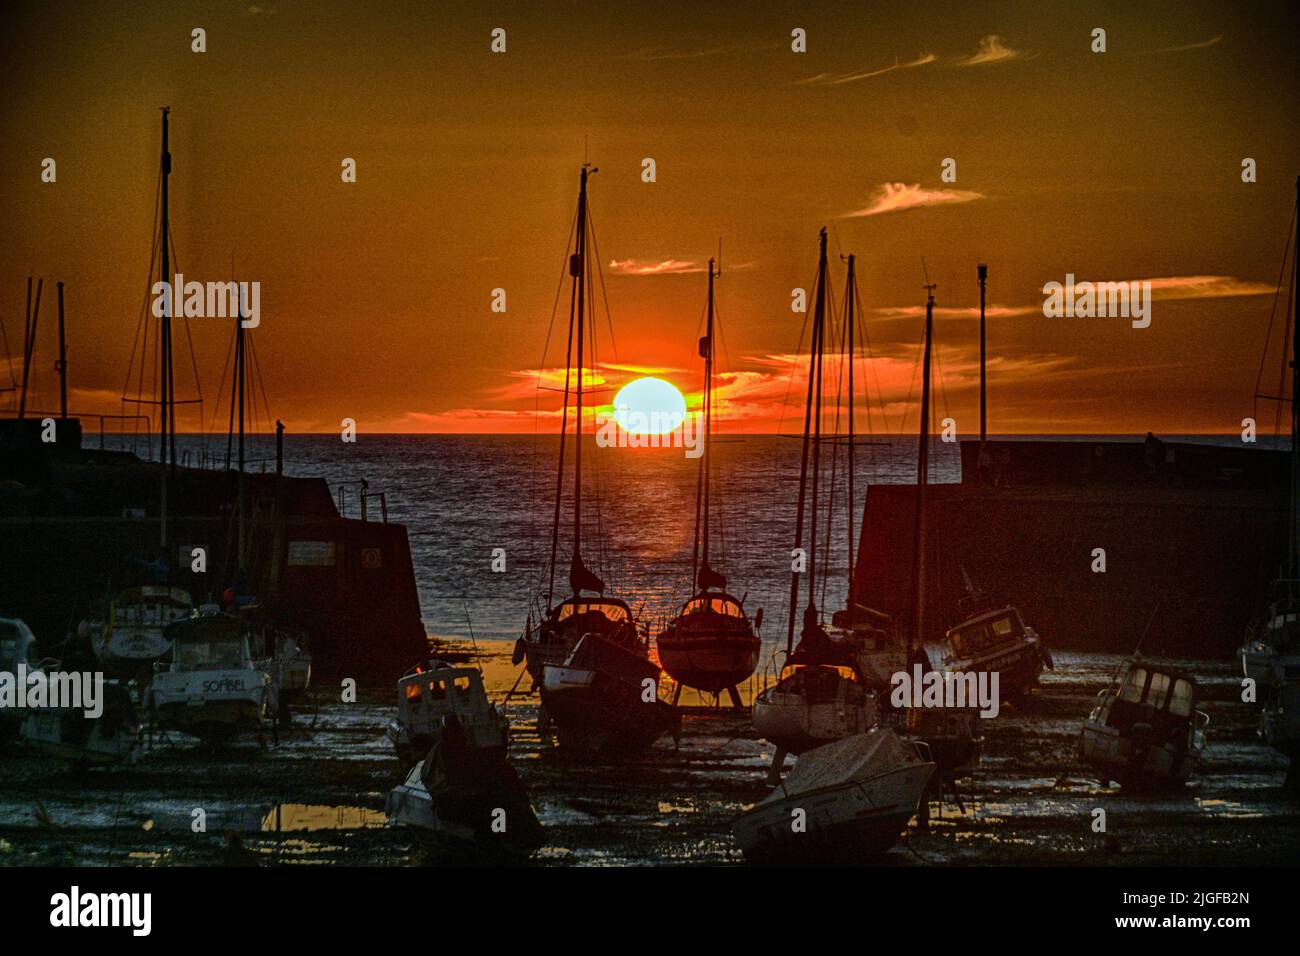 Suns sets in front of the harbor ABERAERON only happens one day in the year  when it is ded center. Stock Photo